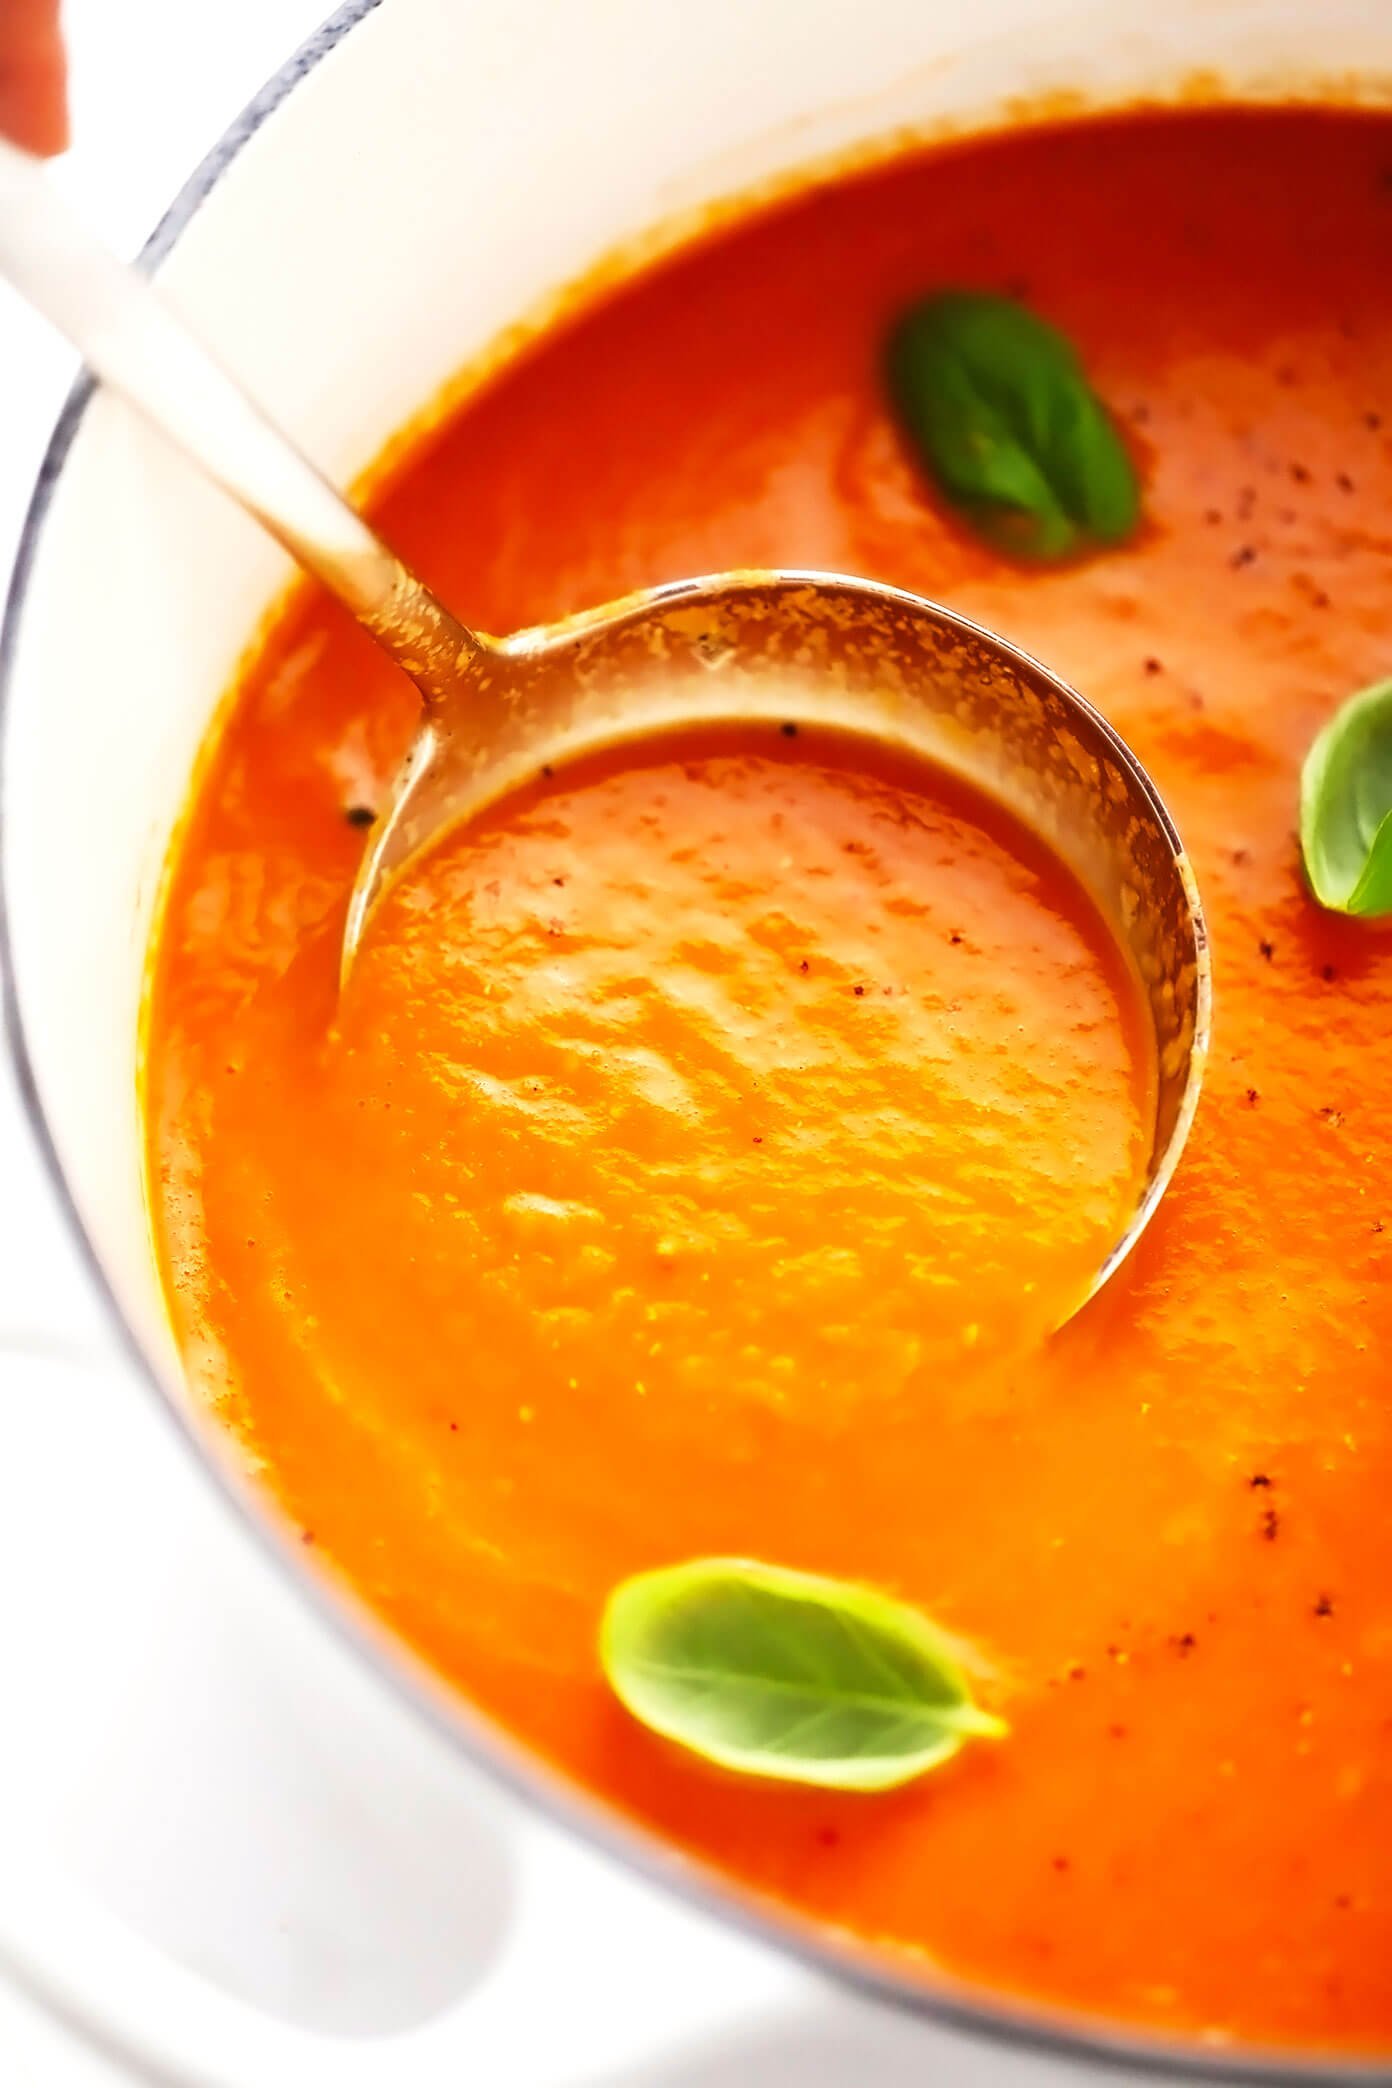 Homemade tomato soup in stockpot